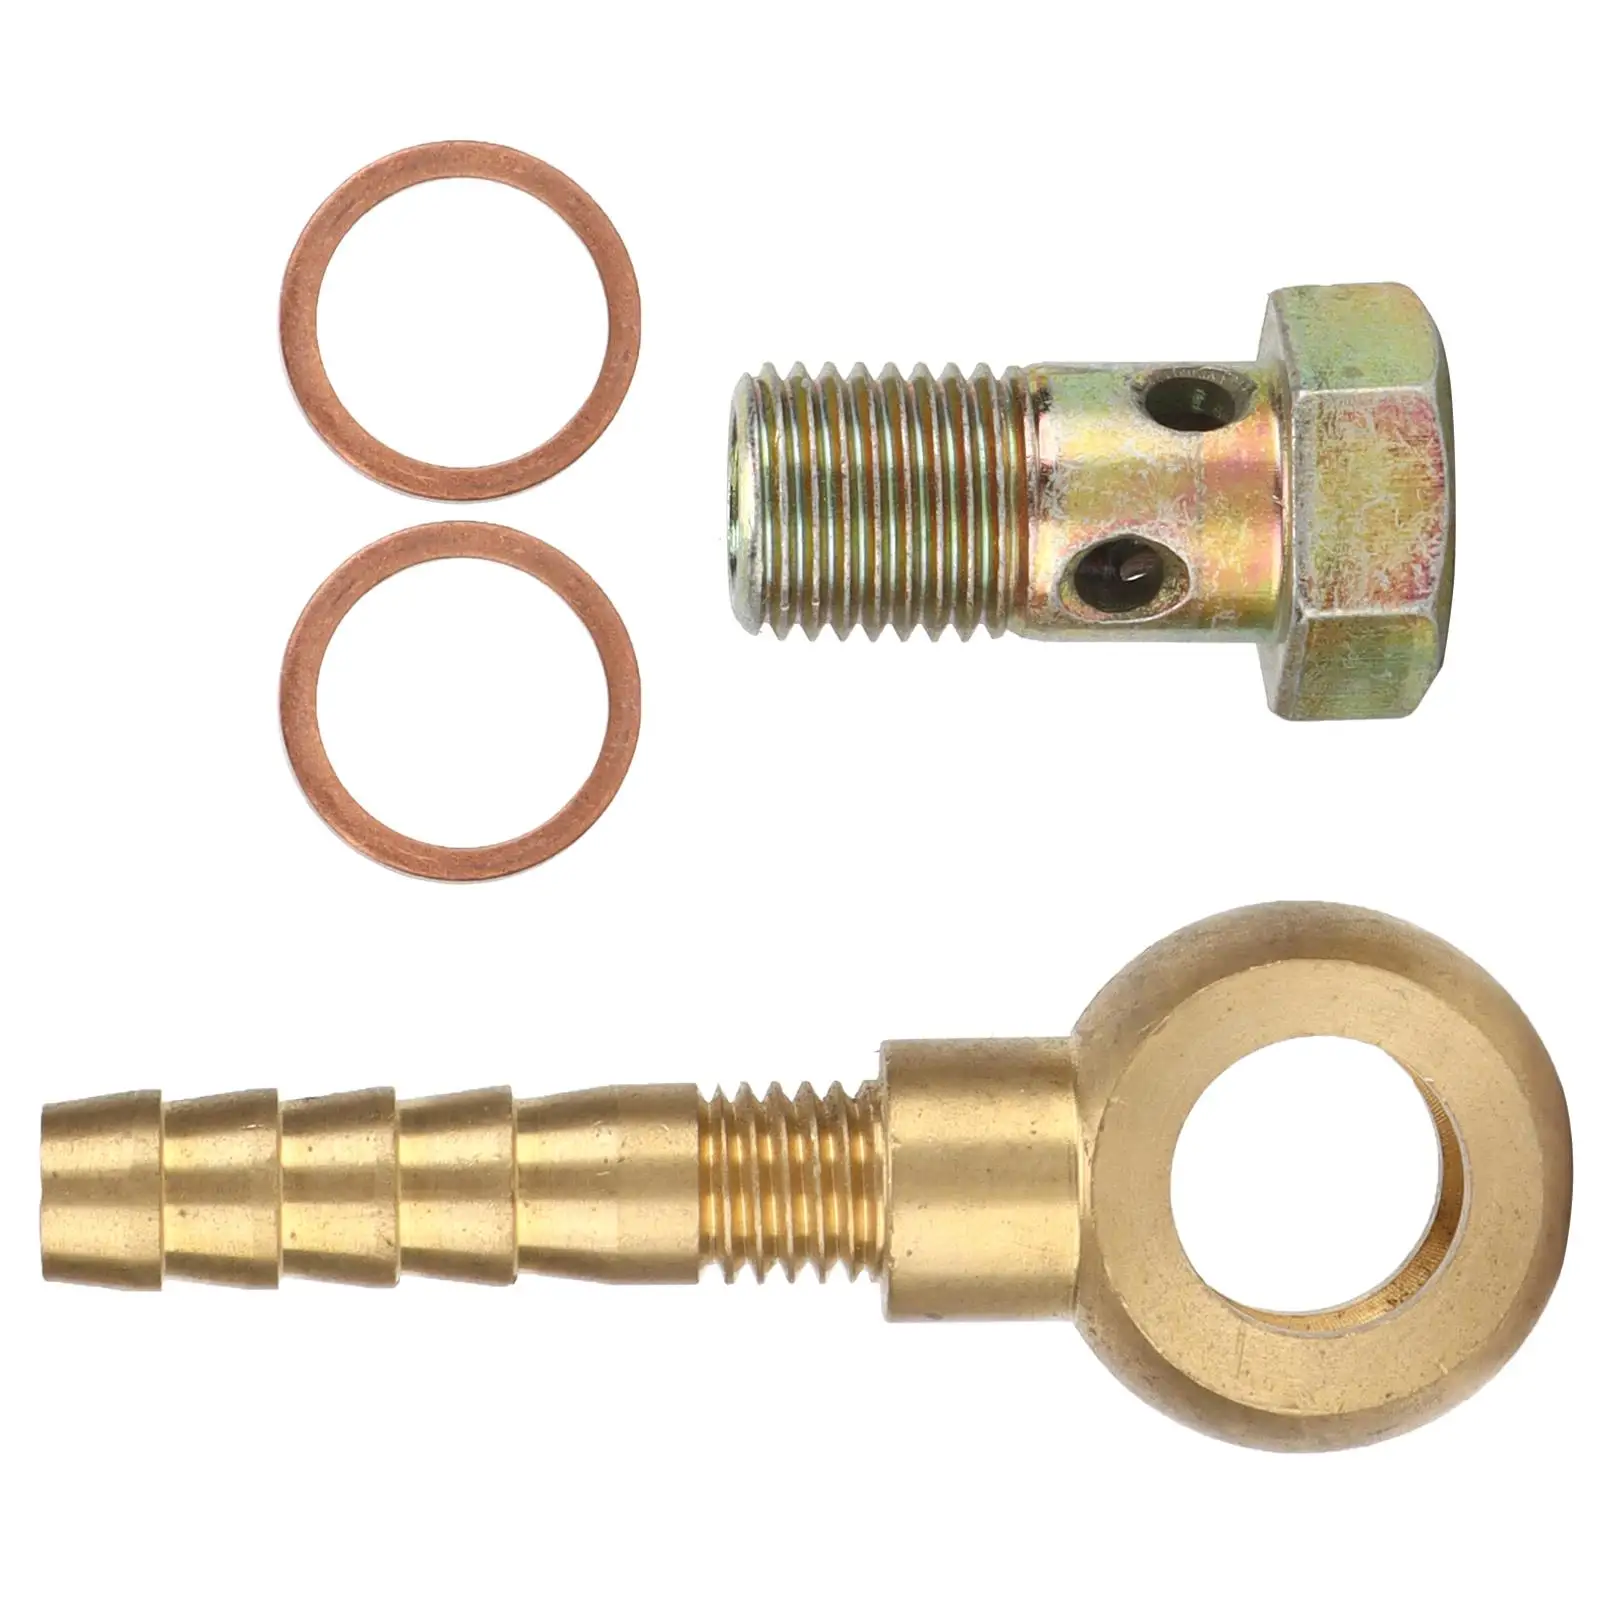 Turbo Banjo Fitting Kit with Hose Barb - Anti-Rust Water Coolant Connection